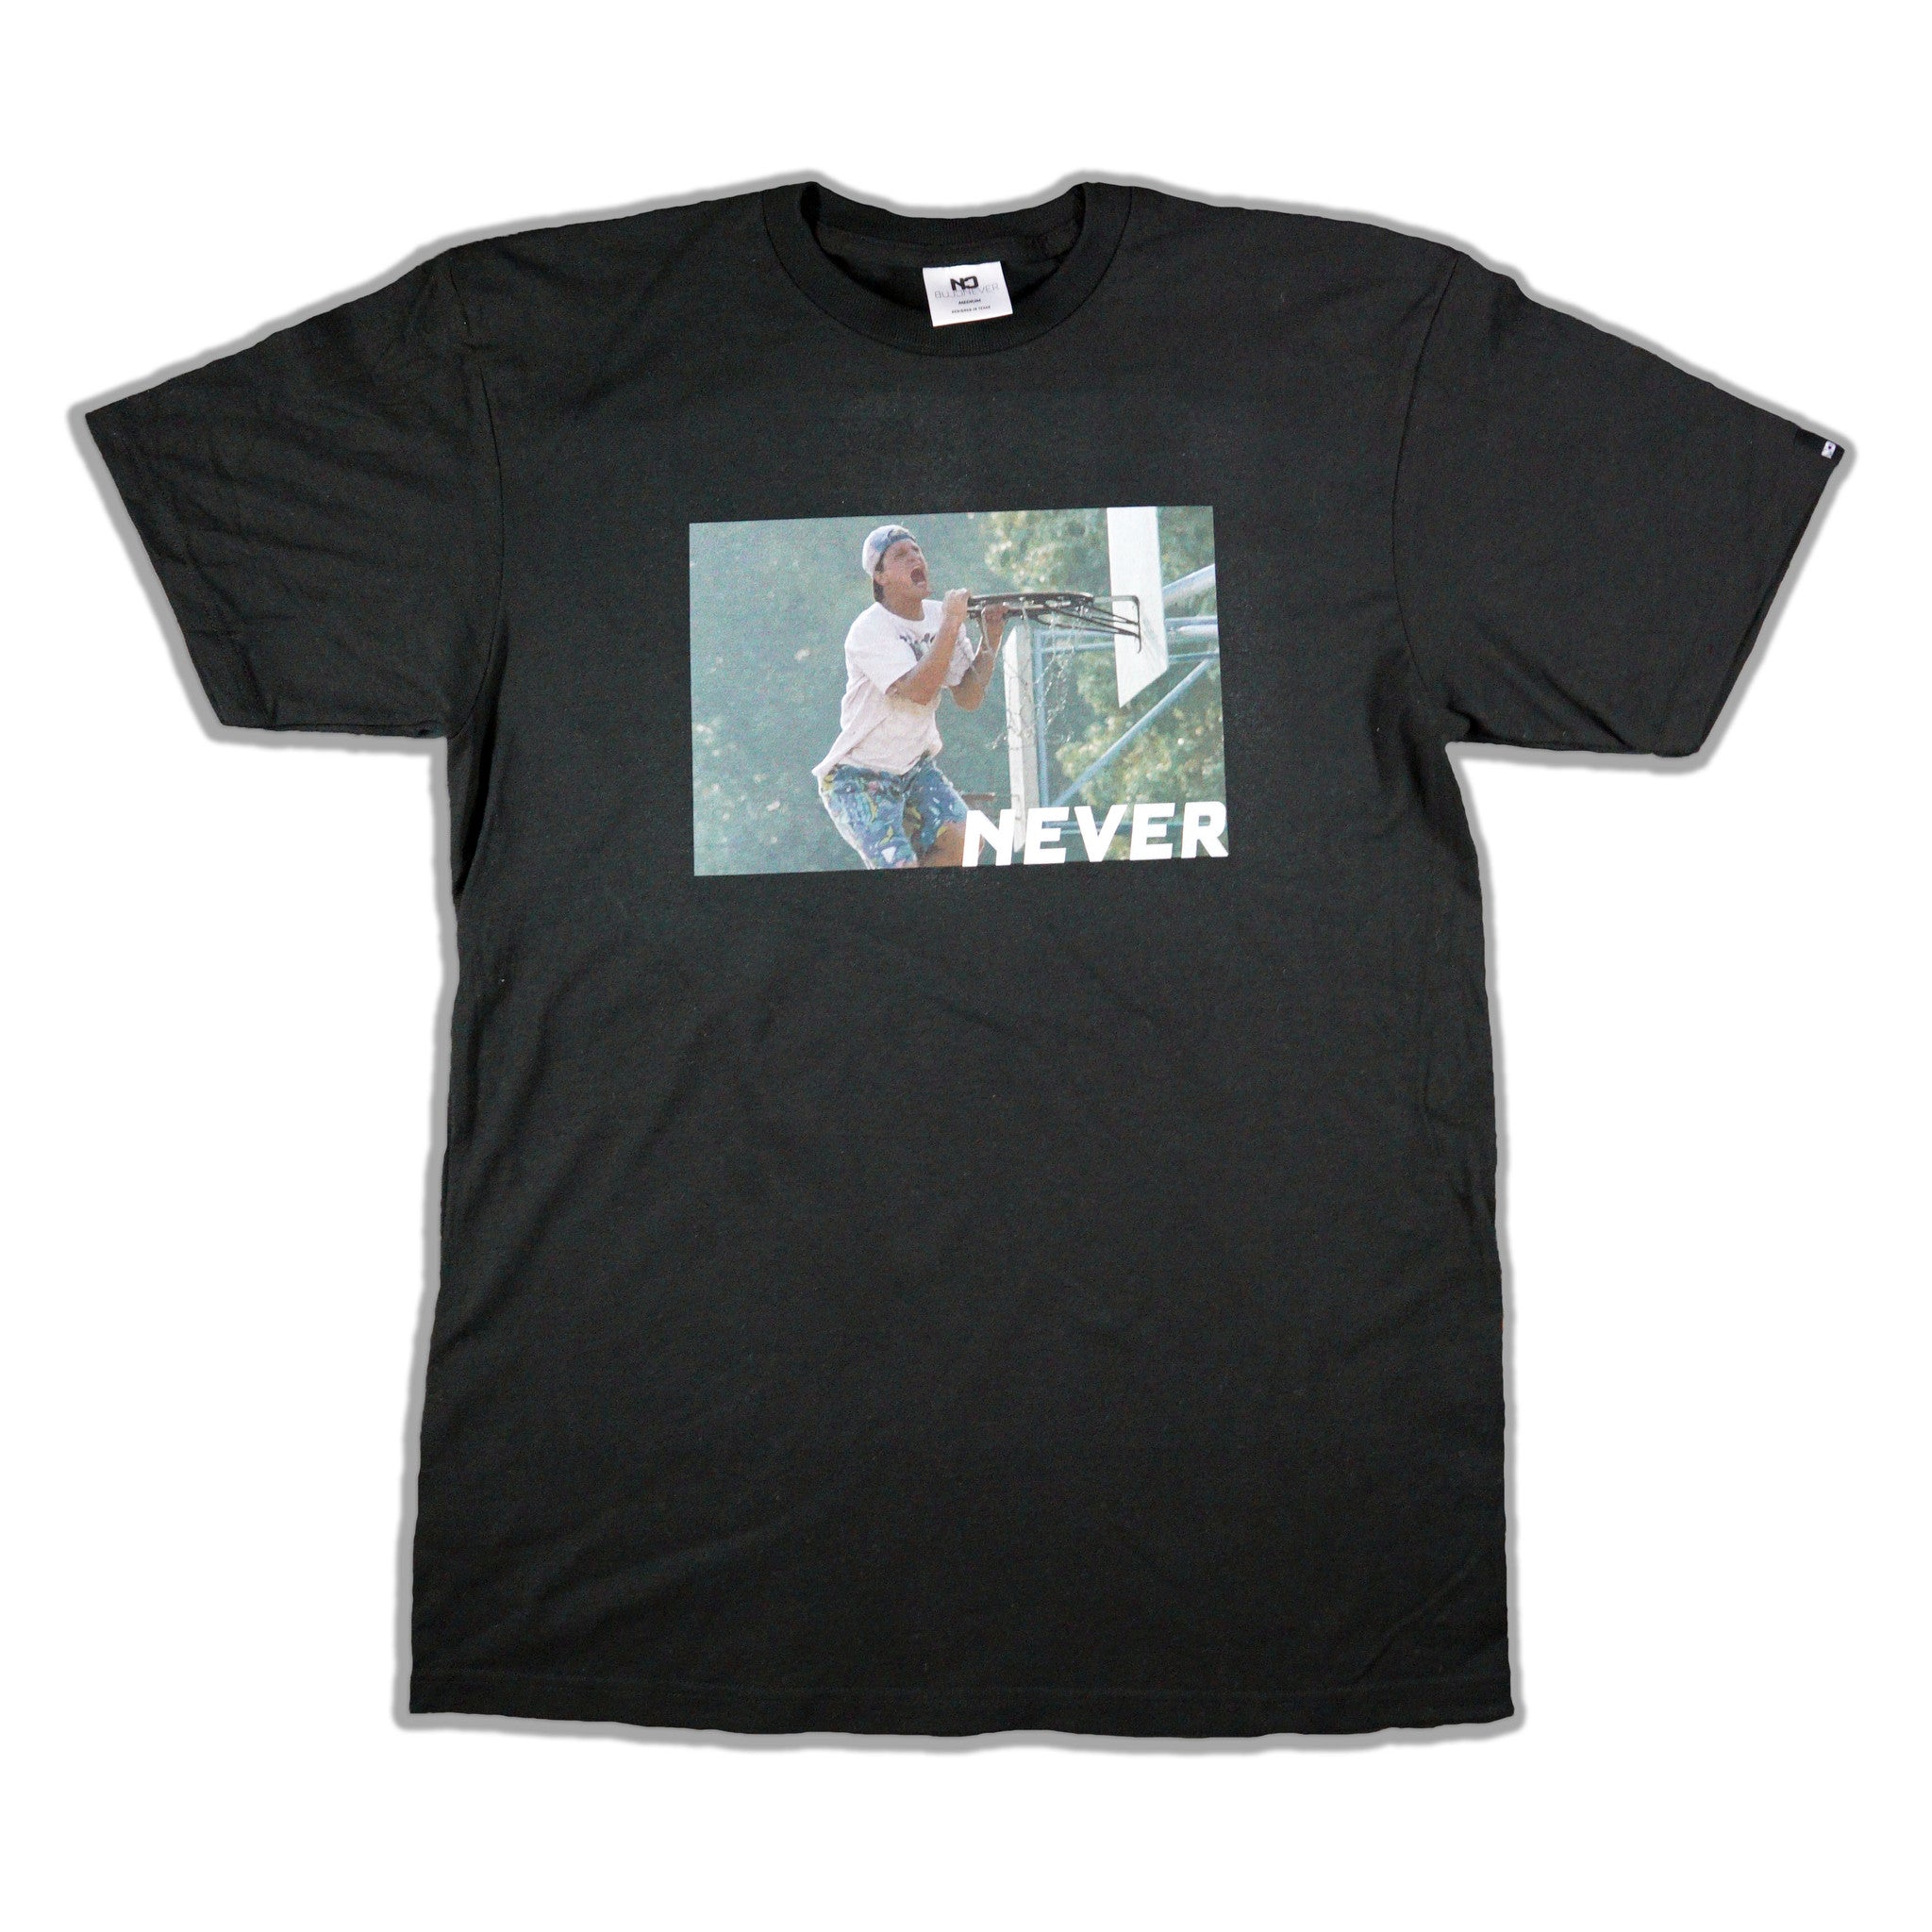 NEVER CAN'T JUMP TEE - BLACK